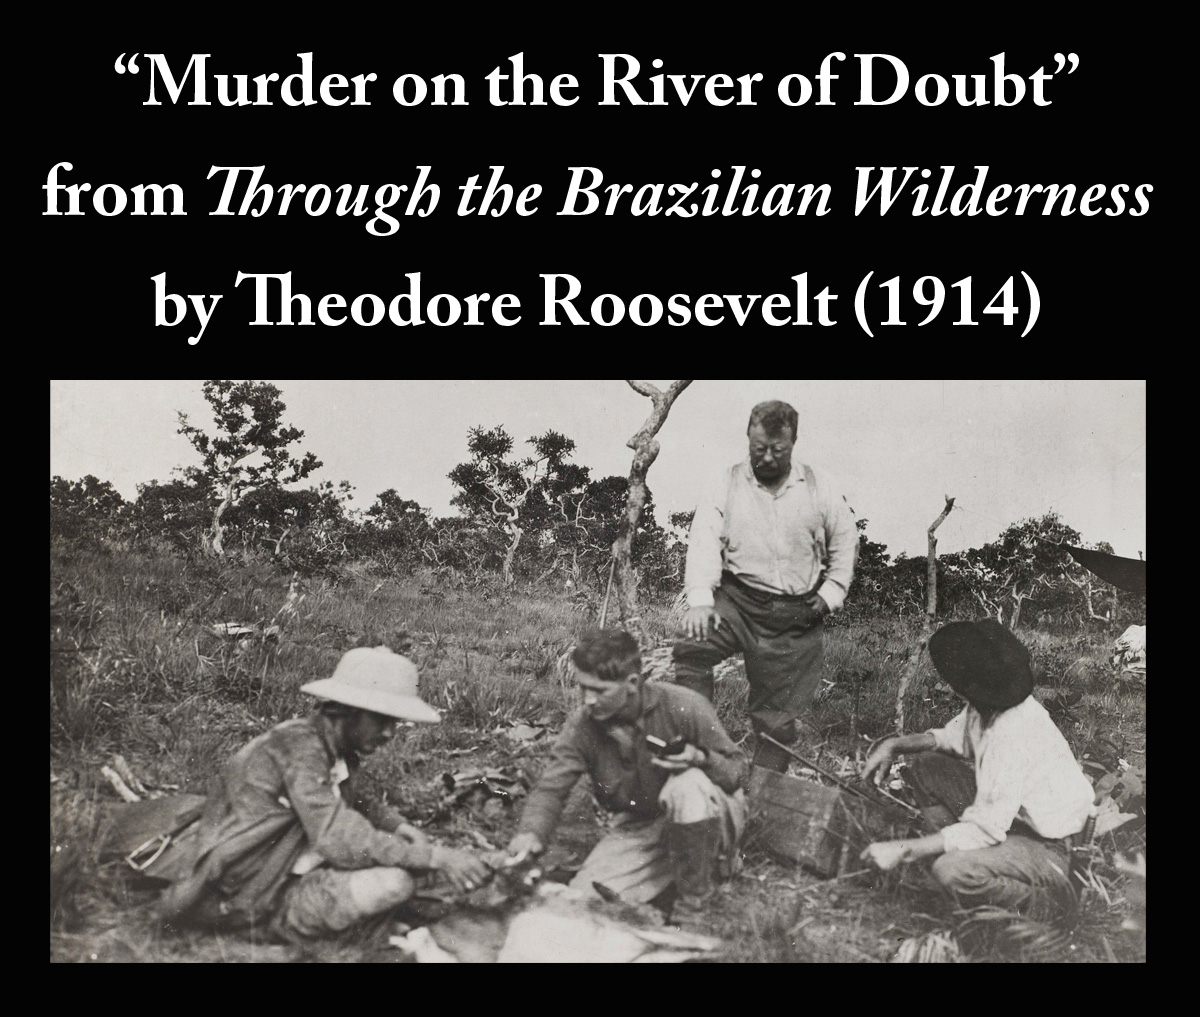 Murder on the River of Doubt from Through the Brazilian Wilderness by Theodore Roosevelt (1914)